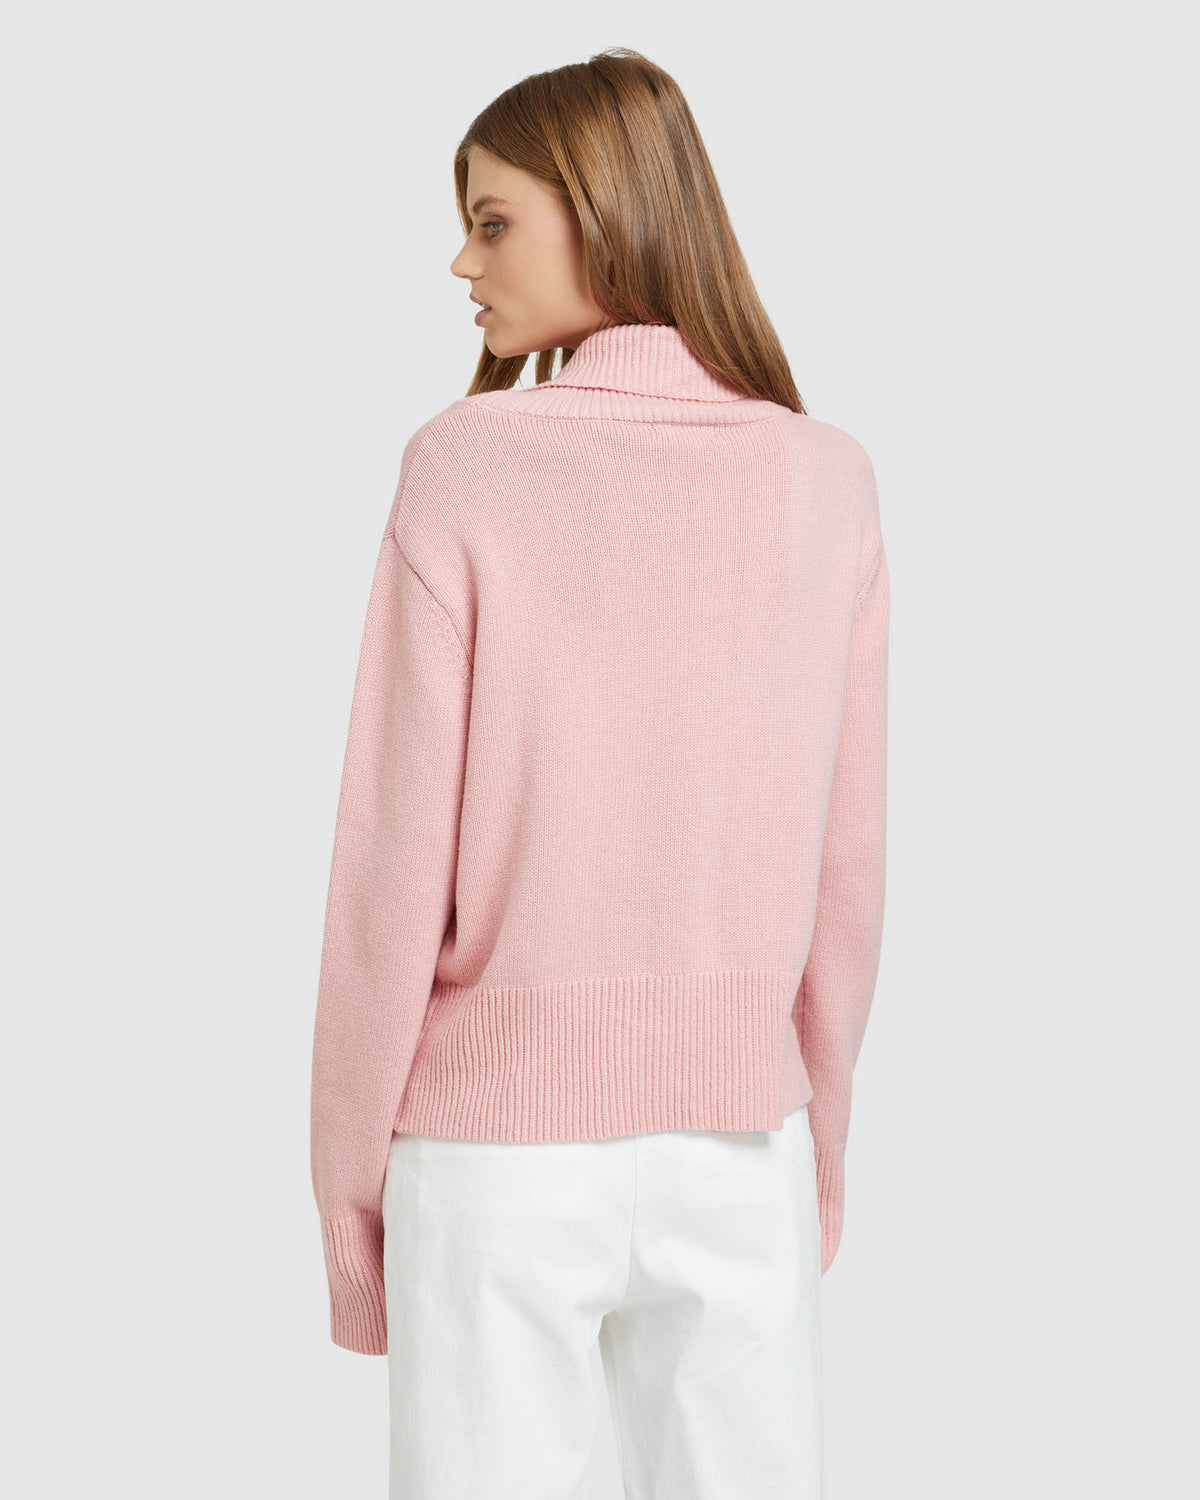 LEXI ROLL NECK KNIT